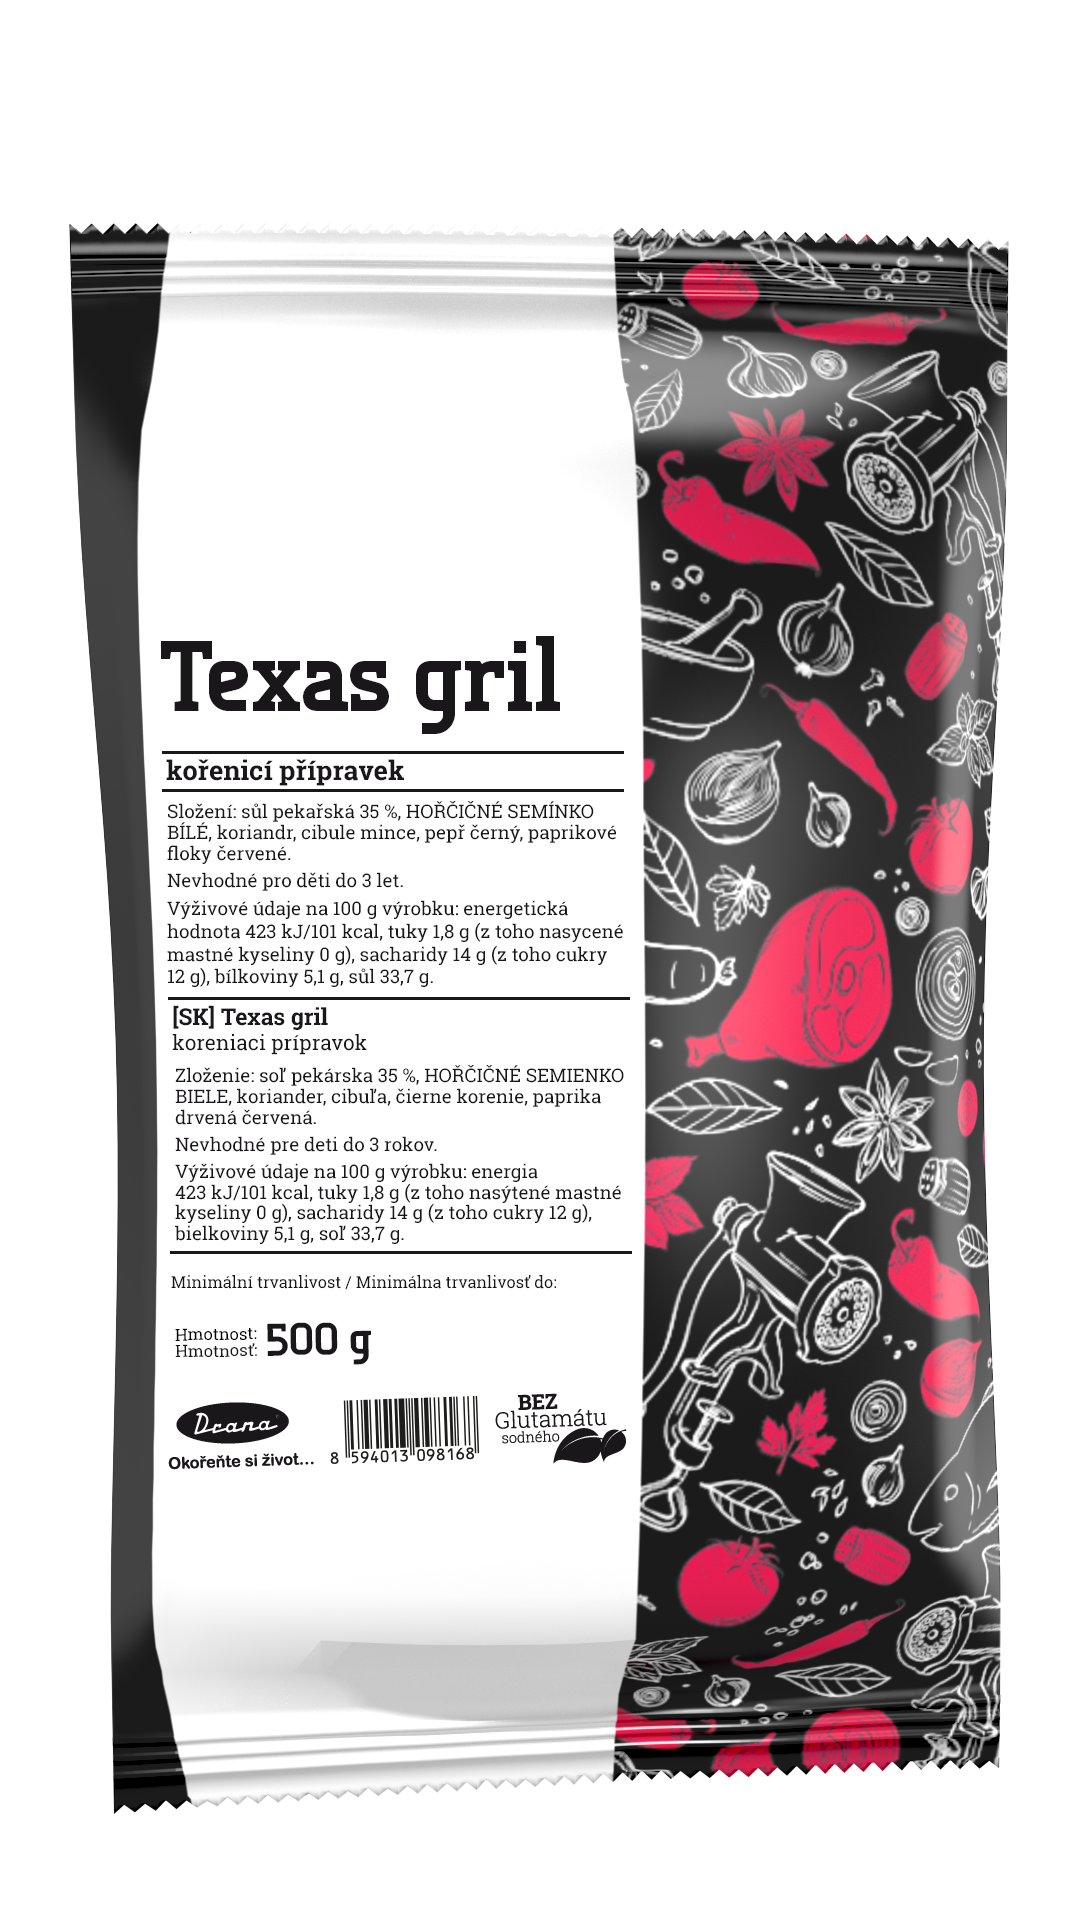 Texas gril 500g